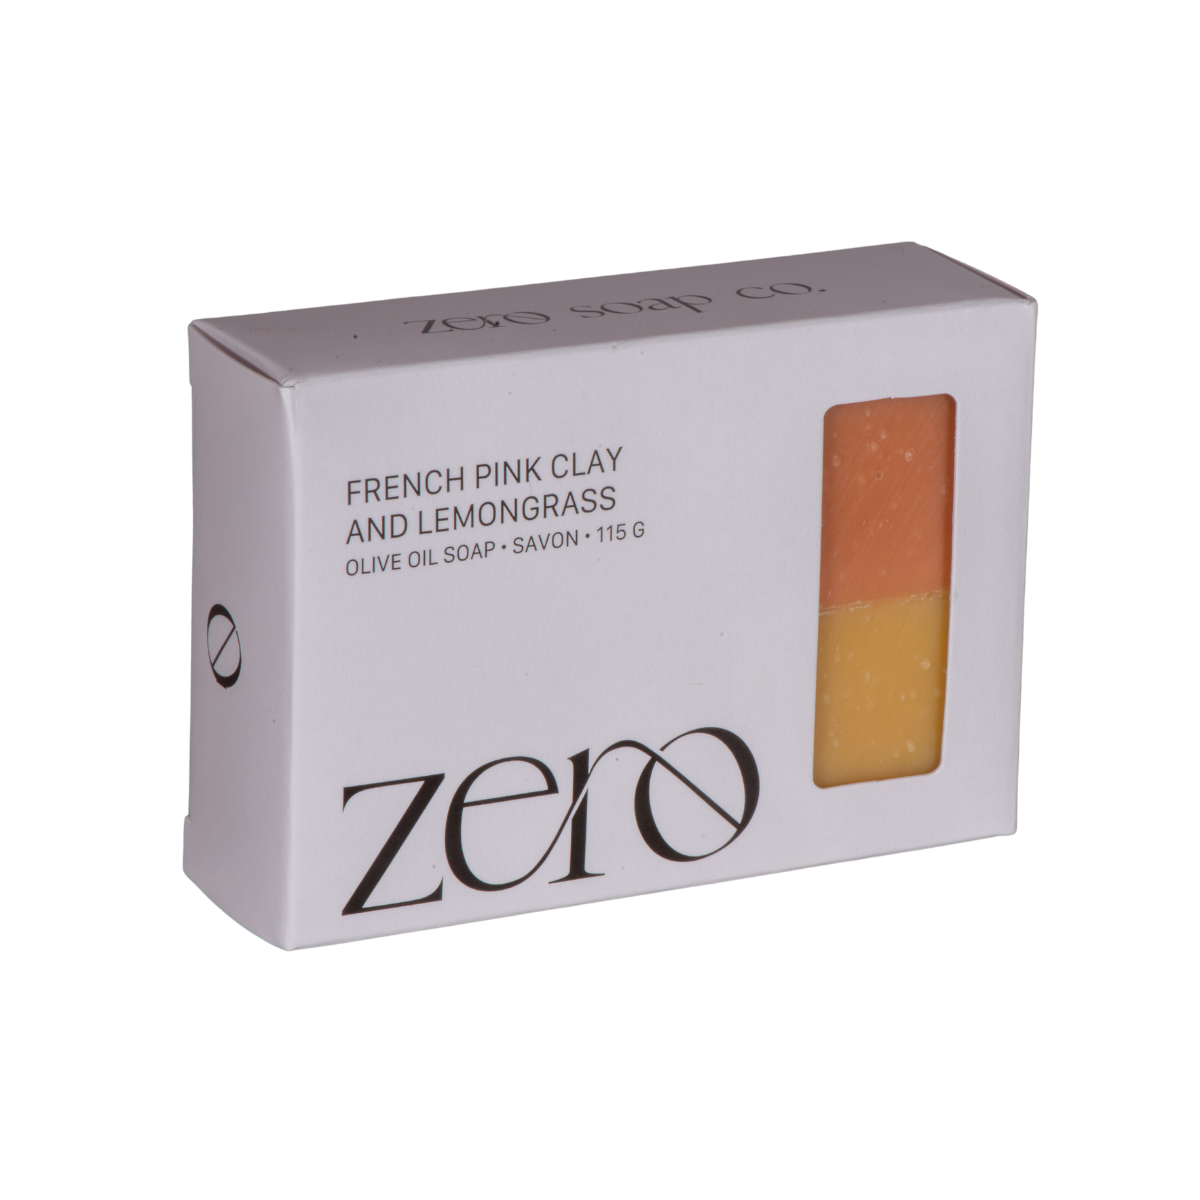 French Pink Clay & Lemongrass Soap Bar by Zero Soap Co.